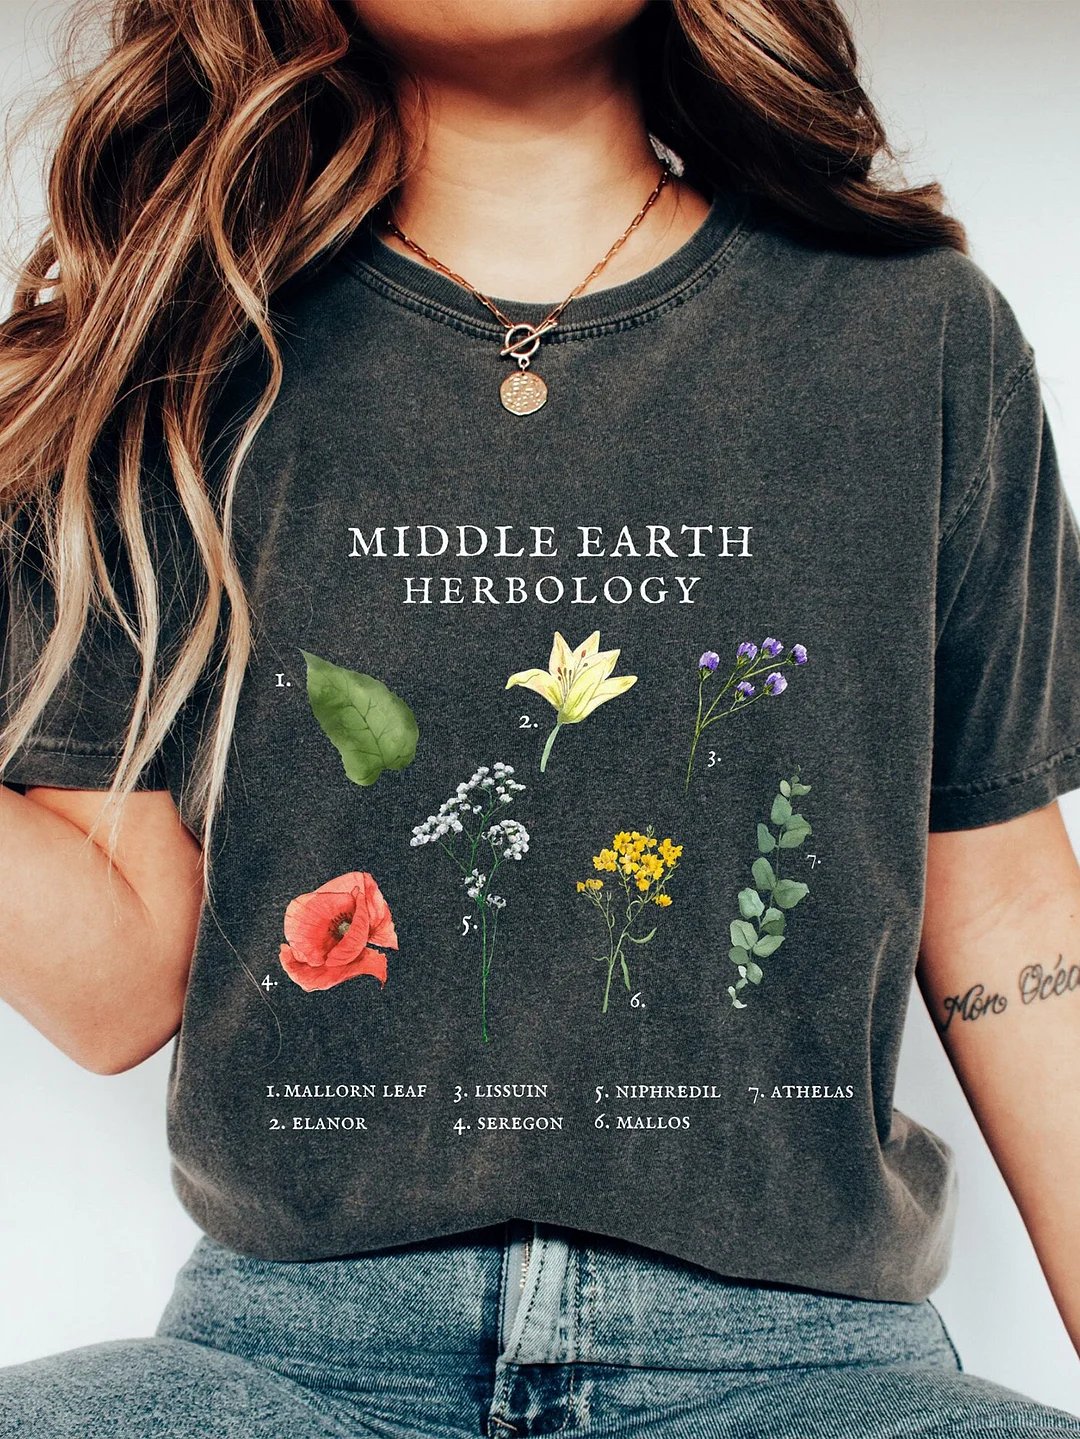 Middle Earth Herbology Shirt. Lord Of The Rings / DarkAcademias /Darkacademias